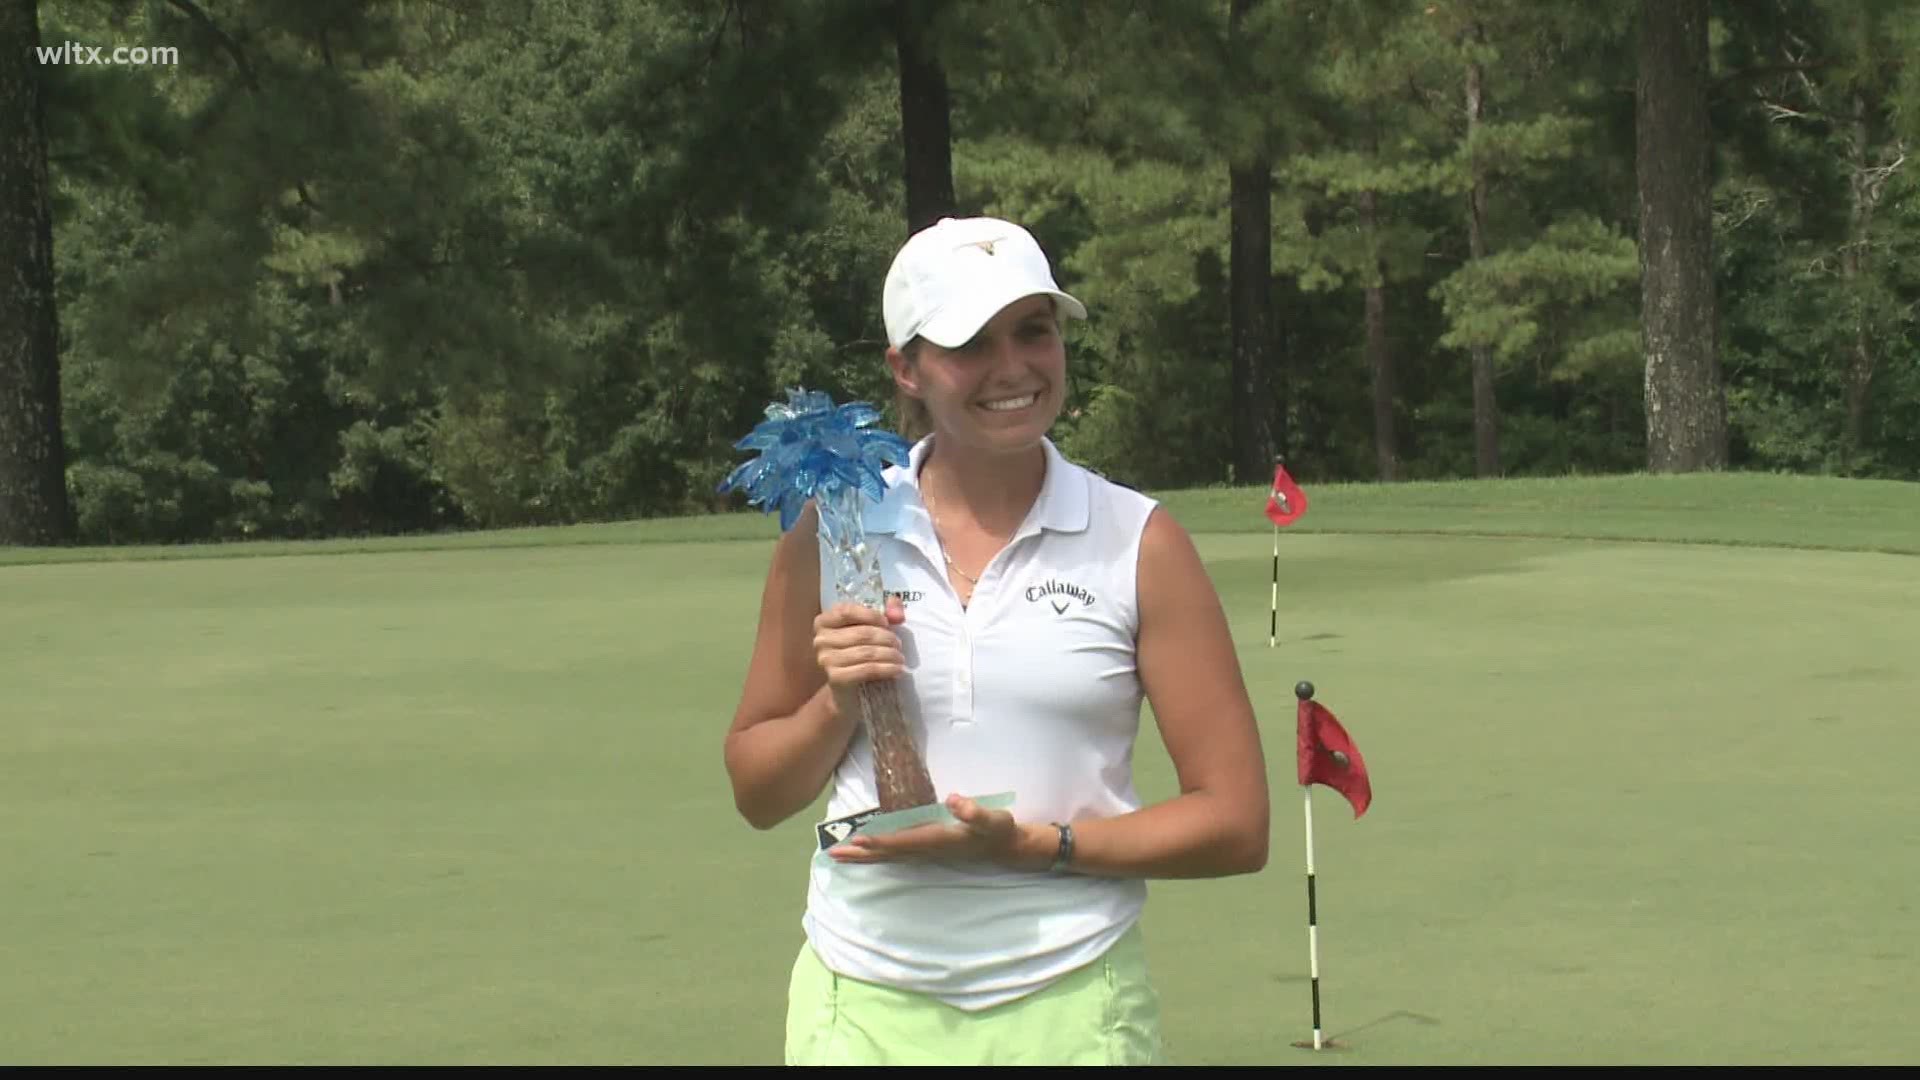 Highlights and reaction from the third annual South Carolina Women's Open from Cobblestone Park Golf Club.